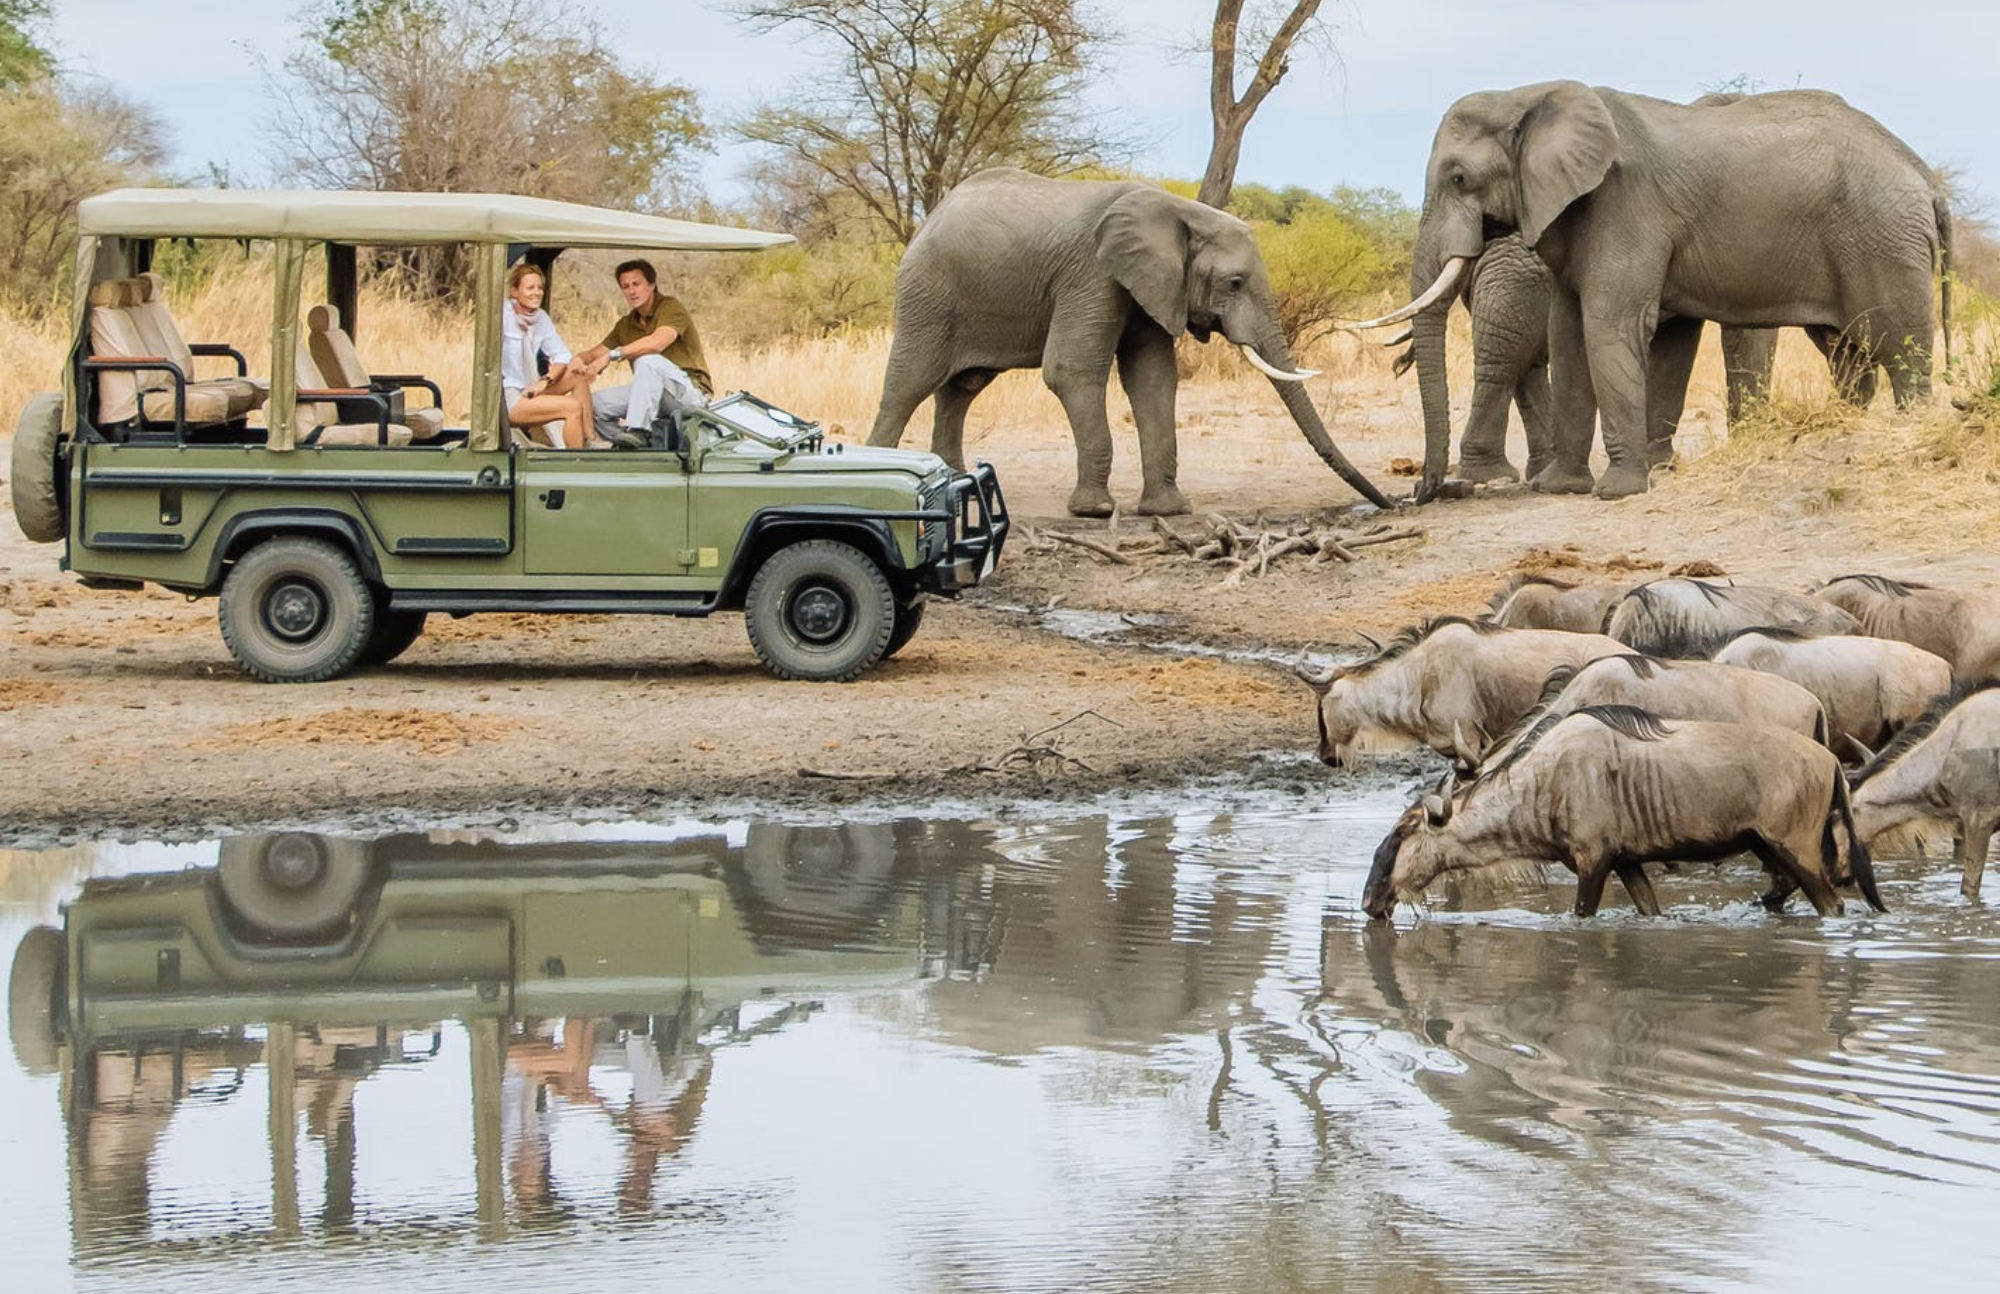 Tourists riding in a car alongside elephants and wildebeest